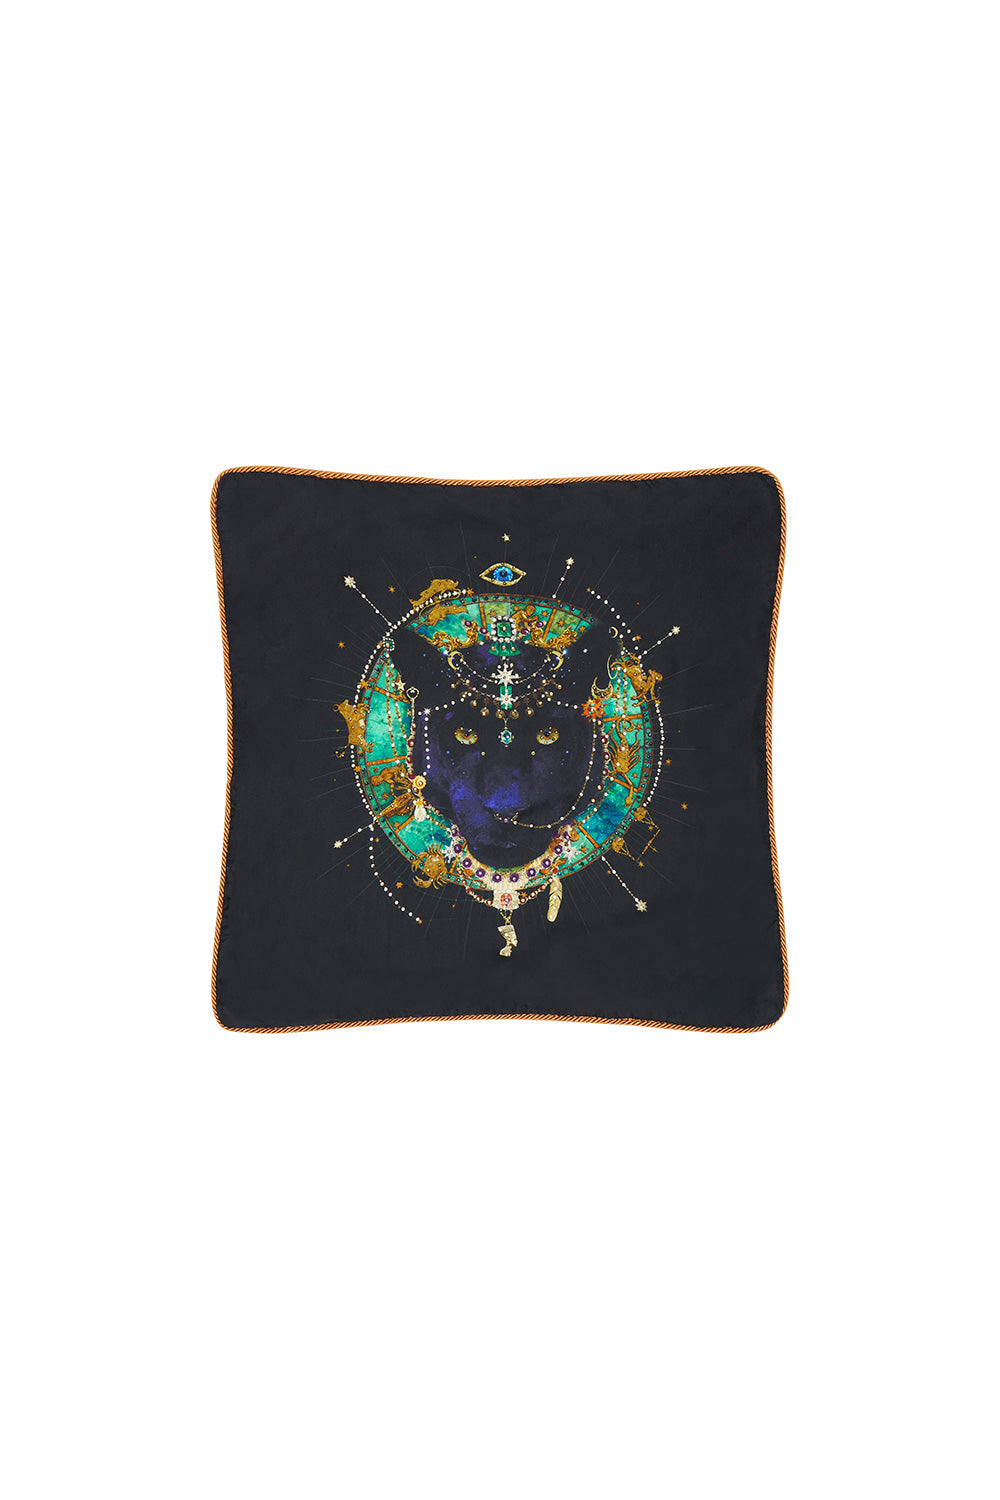 SMALL SQUARE CUSHION MIDNIGHT MOON HOUSE